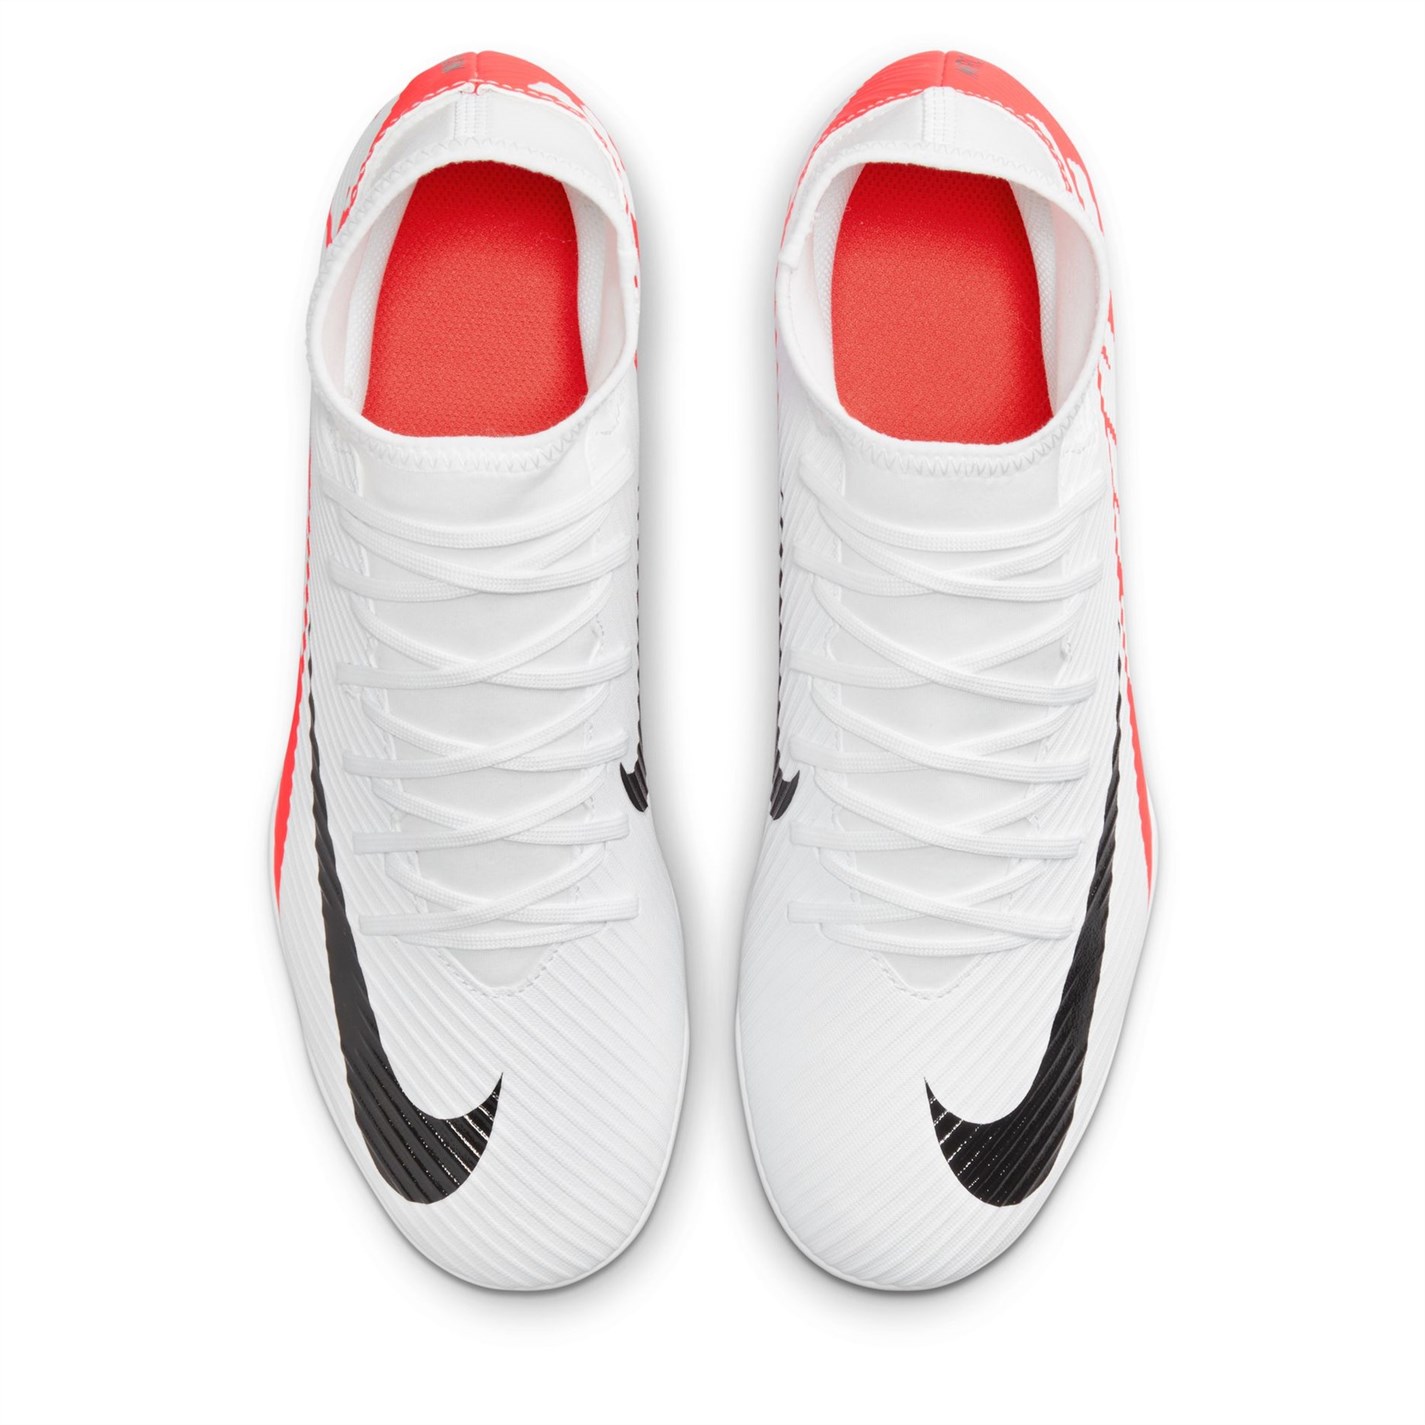 Nike Mercurial Superfly Club Firm Ground Football Boots